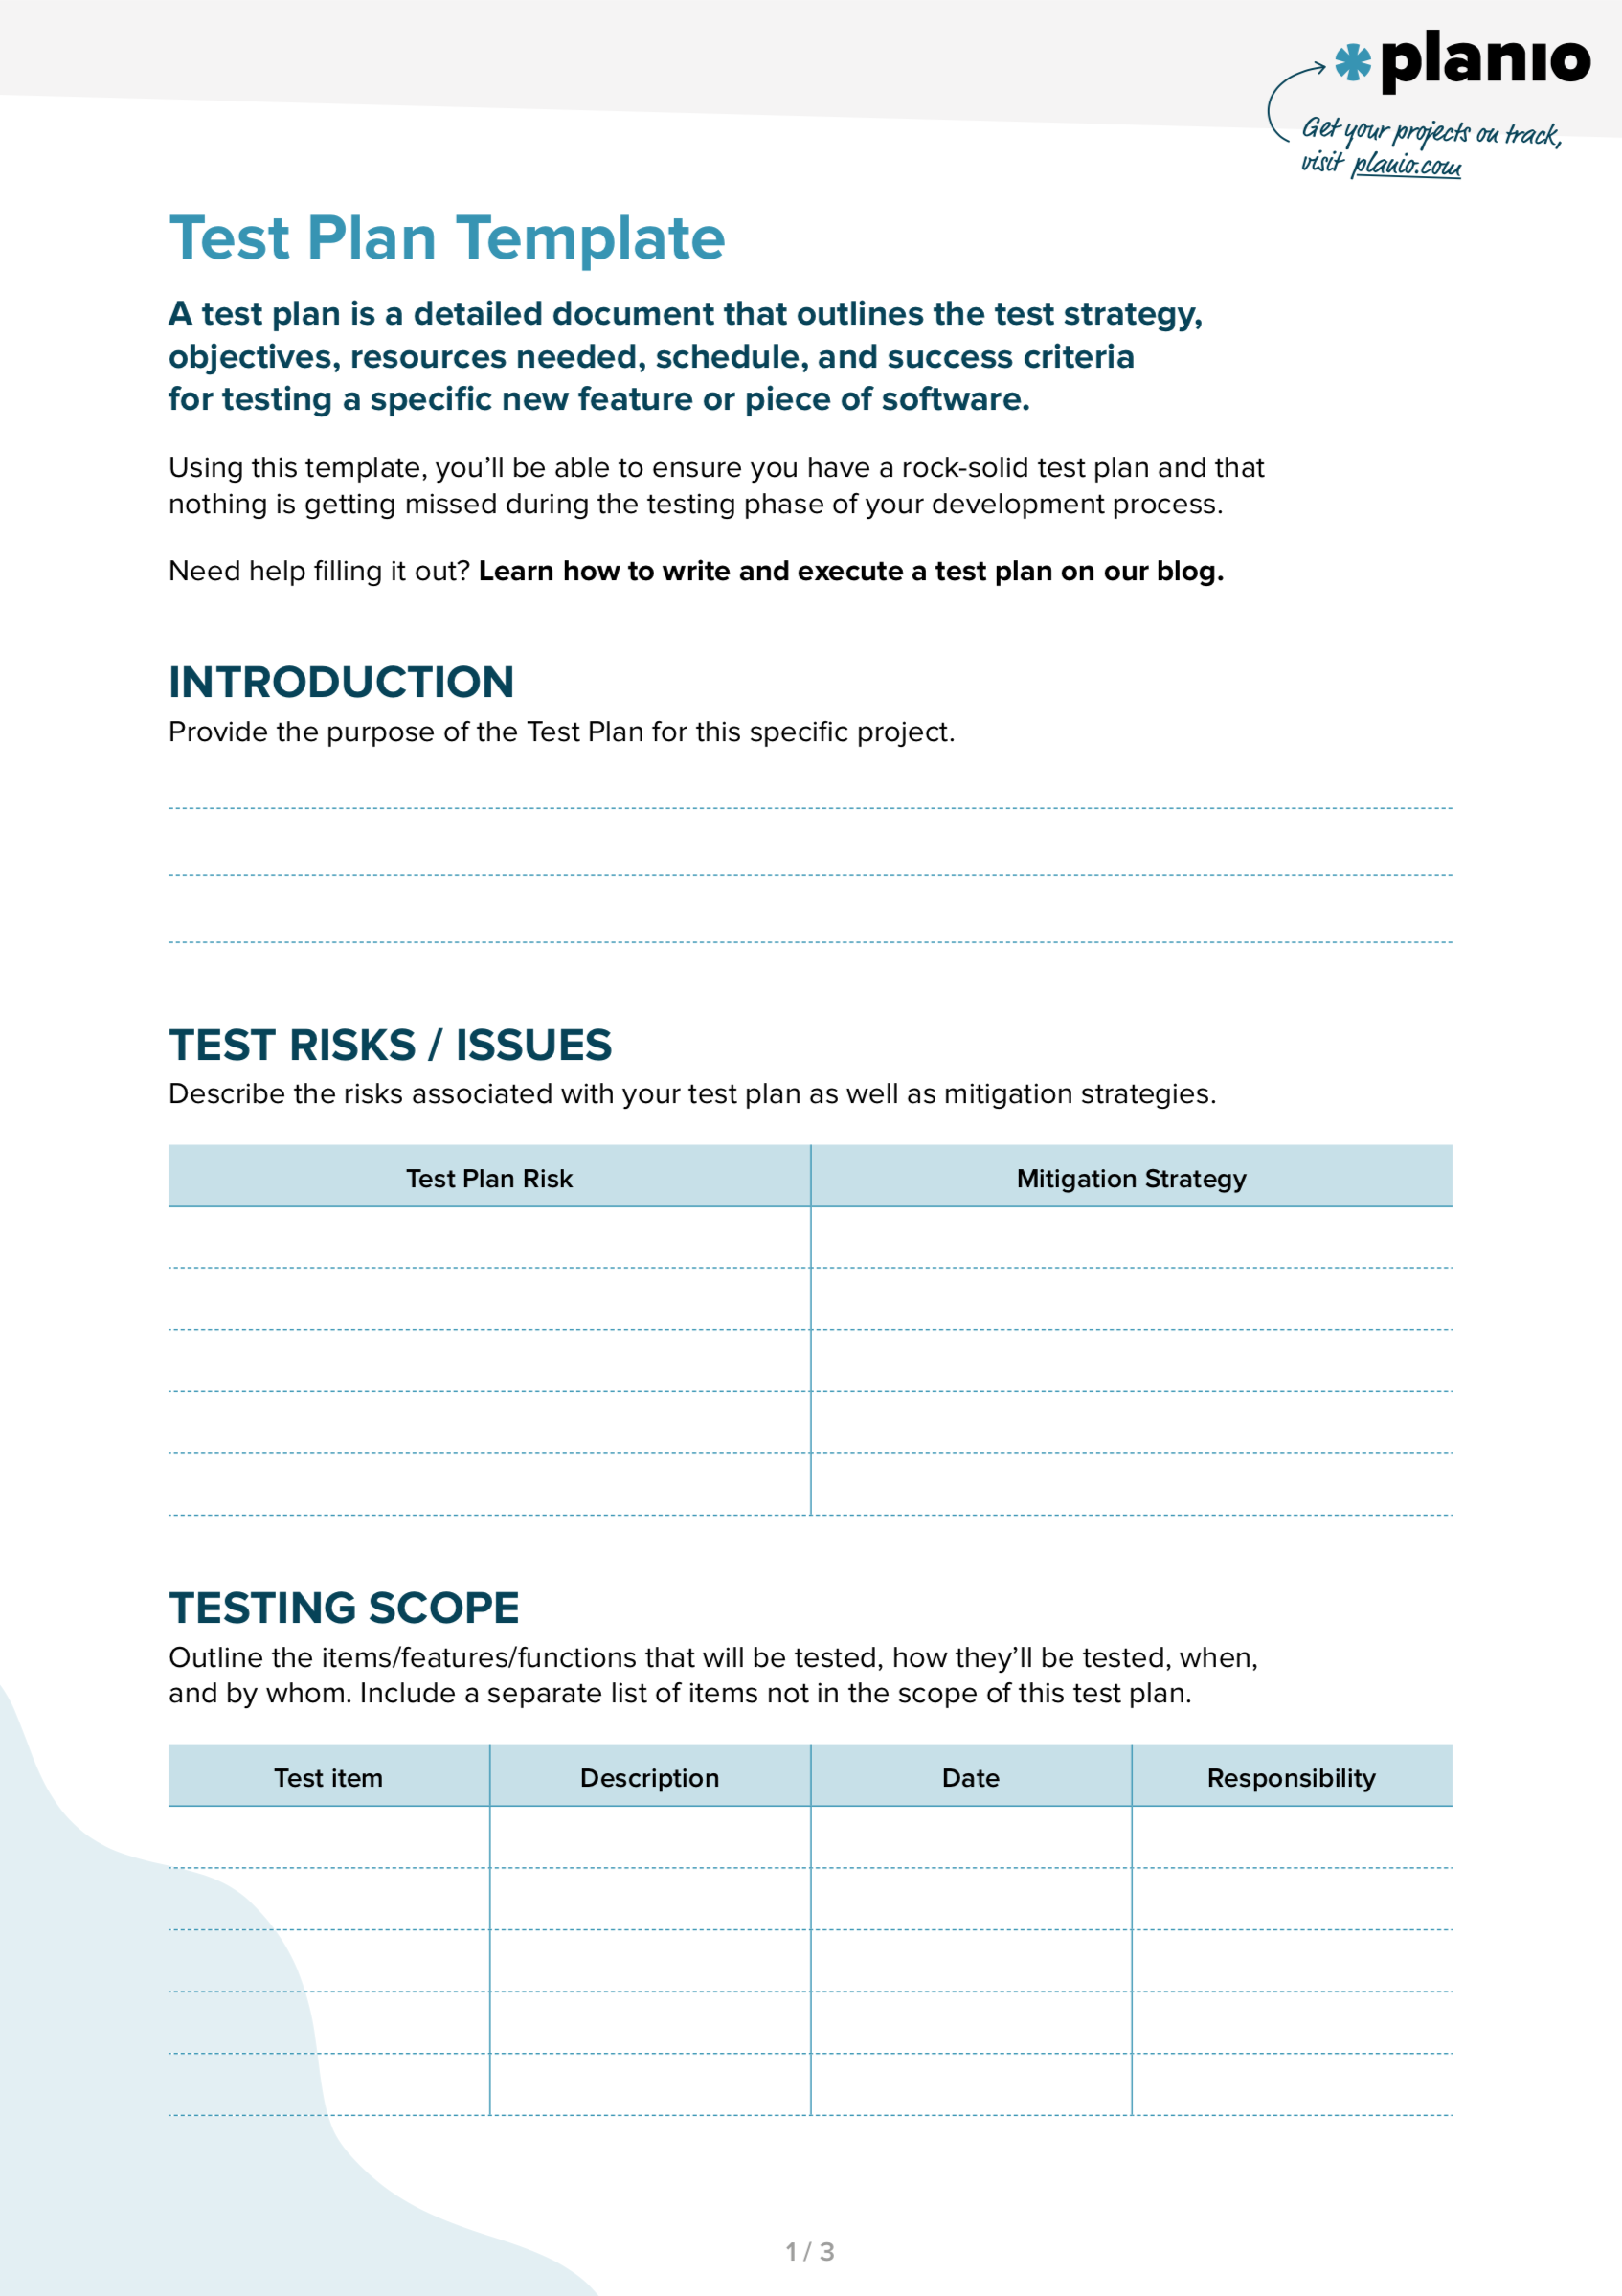 5 Steps to Create a Test Plan for Your New Feature Release (Free test